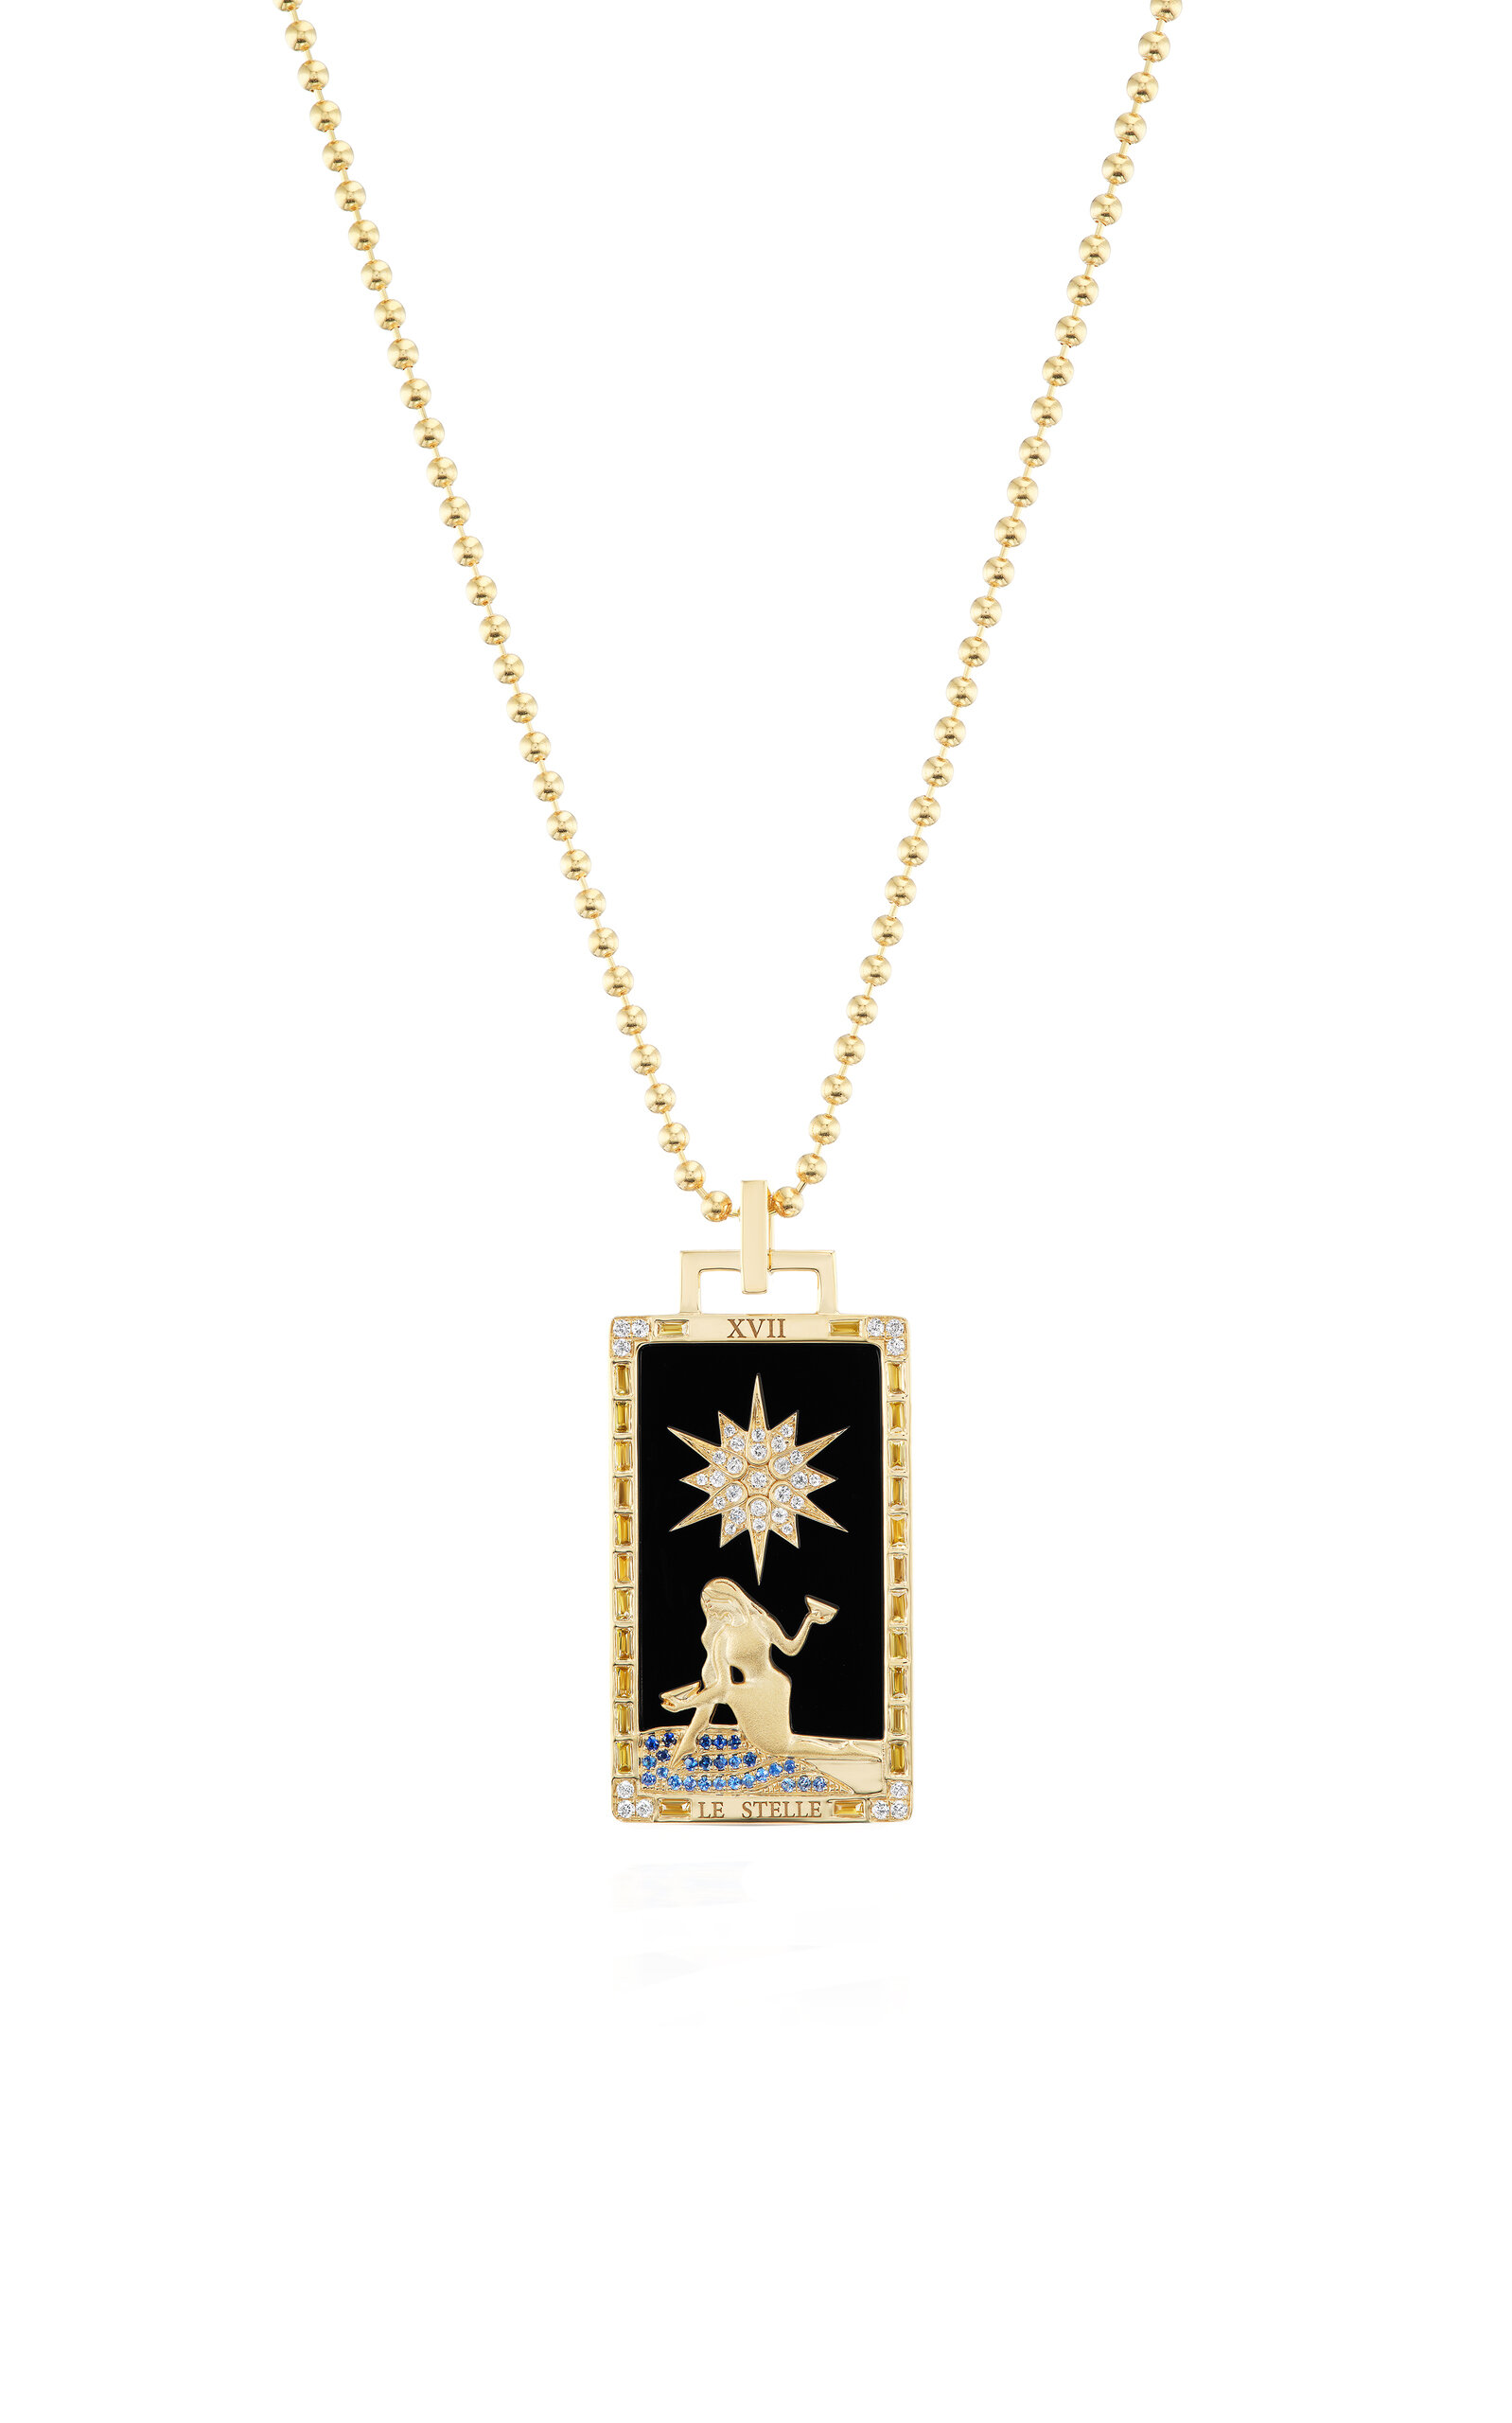 Le Stelle Piccola 18K Yellow Gold Onyx Tarot Card Necklace